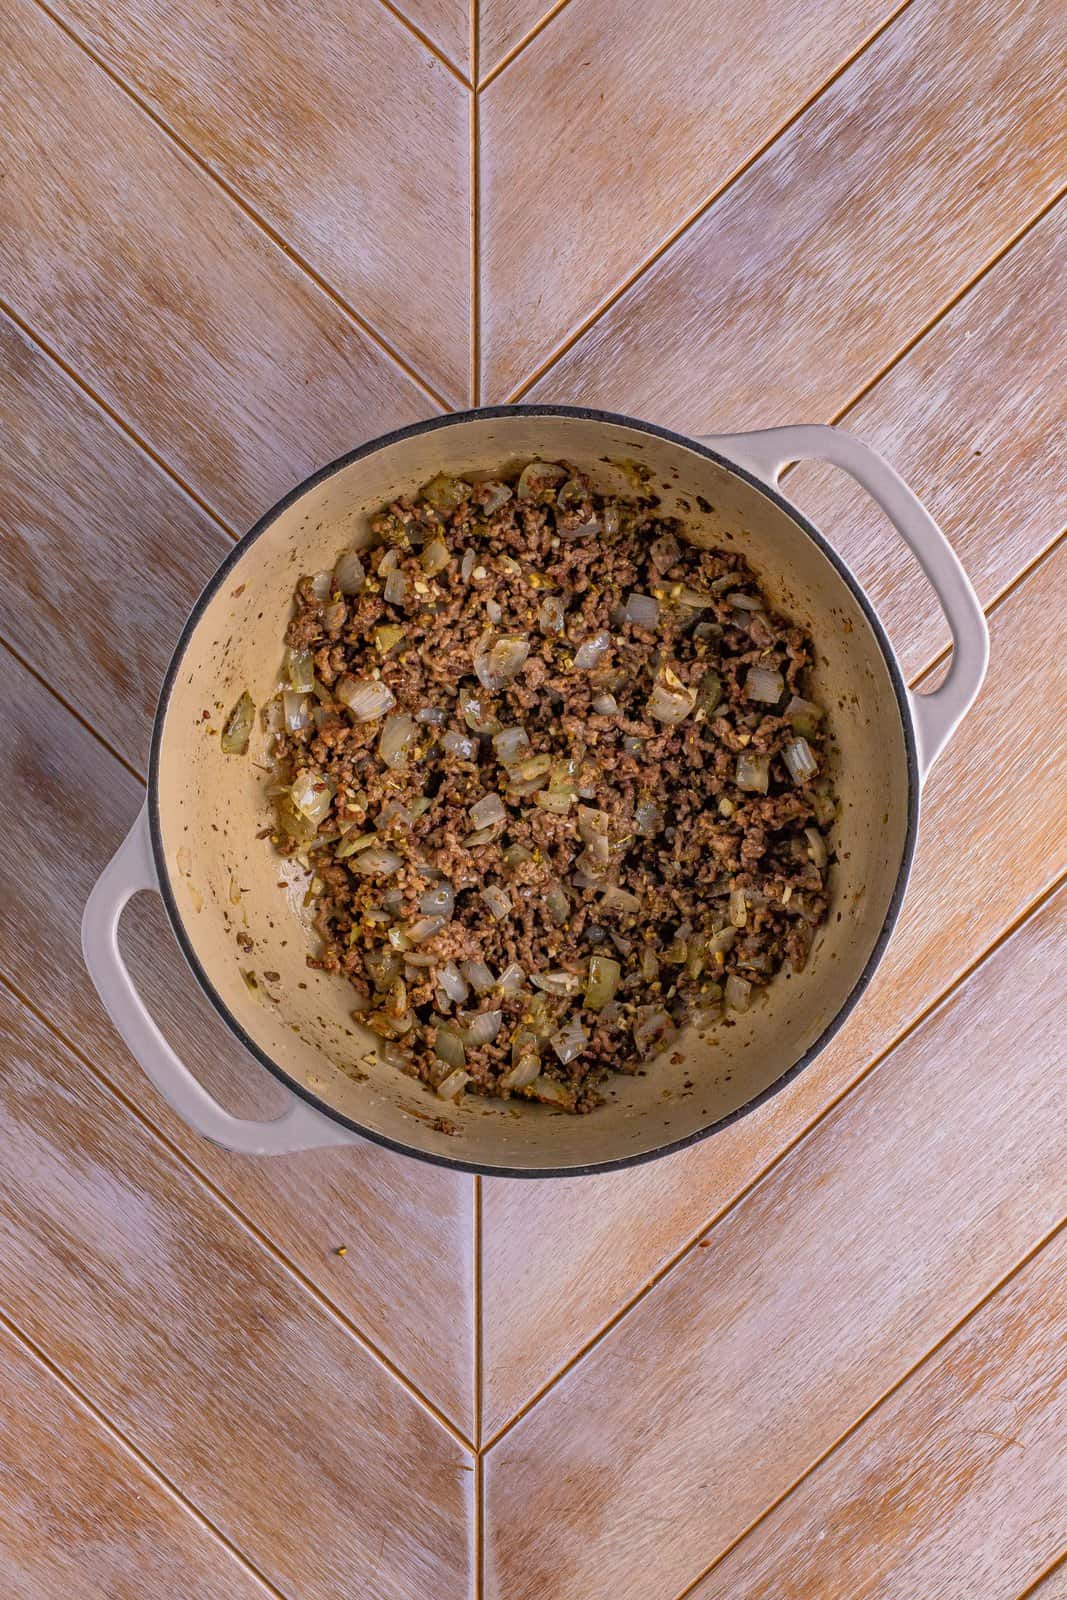 Dutch oven with cooked ground beef, diced onion, and spices mixed in.